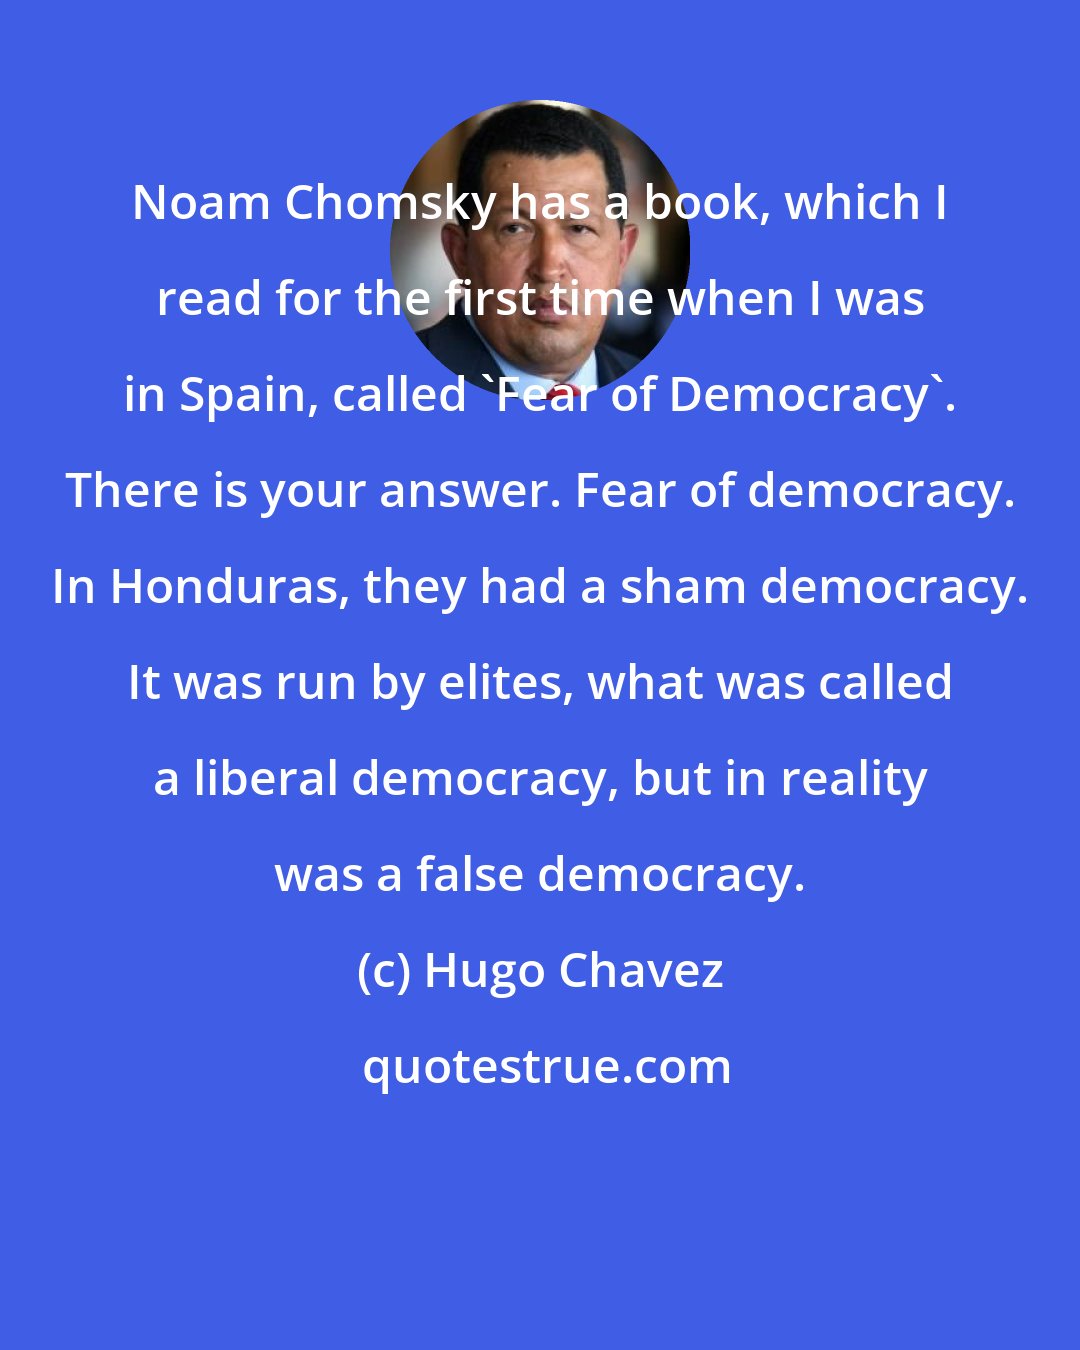 Hugo Chavez: Noam Chomsky has a book, which I read for the first time when I was in Spain, called 'Fear of Democracy'. There is your answer. Fear of democracy. In Honduras, they had a sham democracy. It was run by elites, what was called a liberal democracy, but in reality was a false democracy.